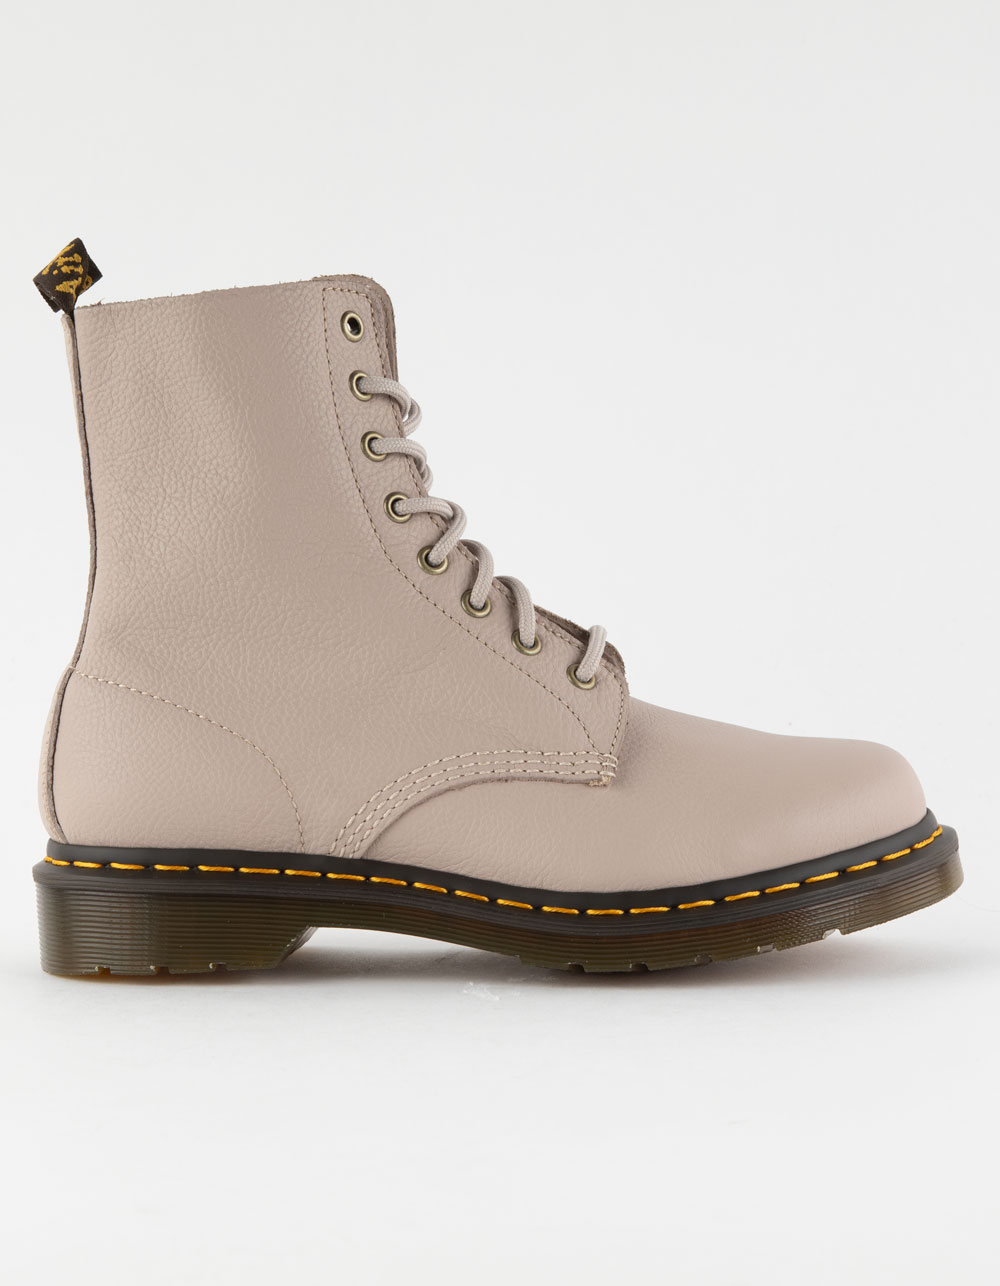 Doc Martens review: Are the 1460 Pascal Virginia boots comfortable? -  Reviewed